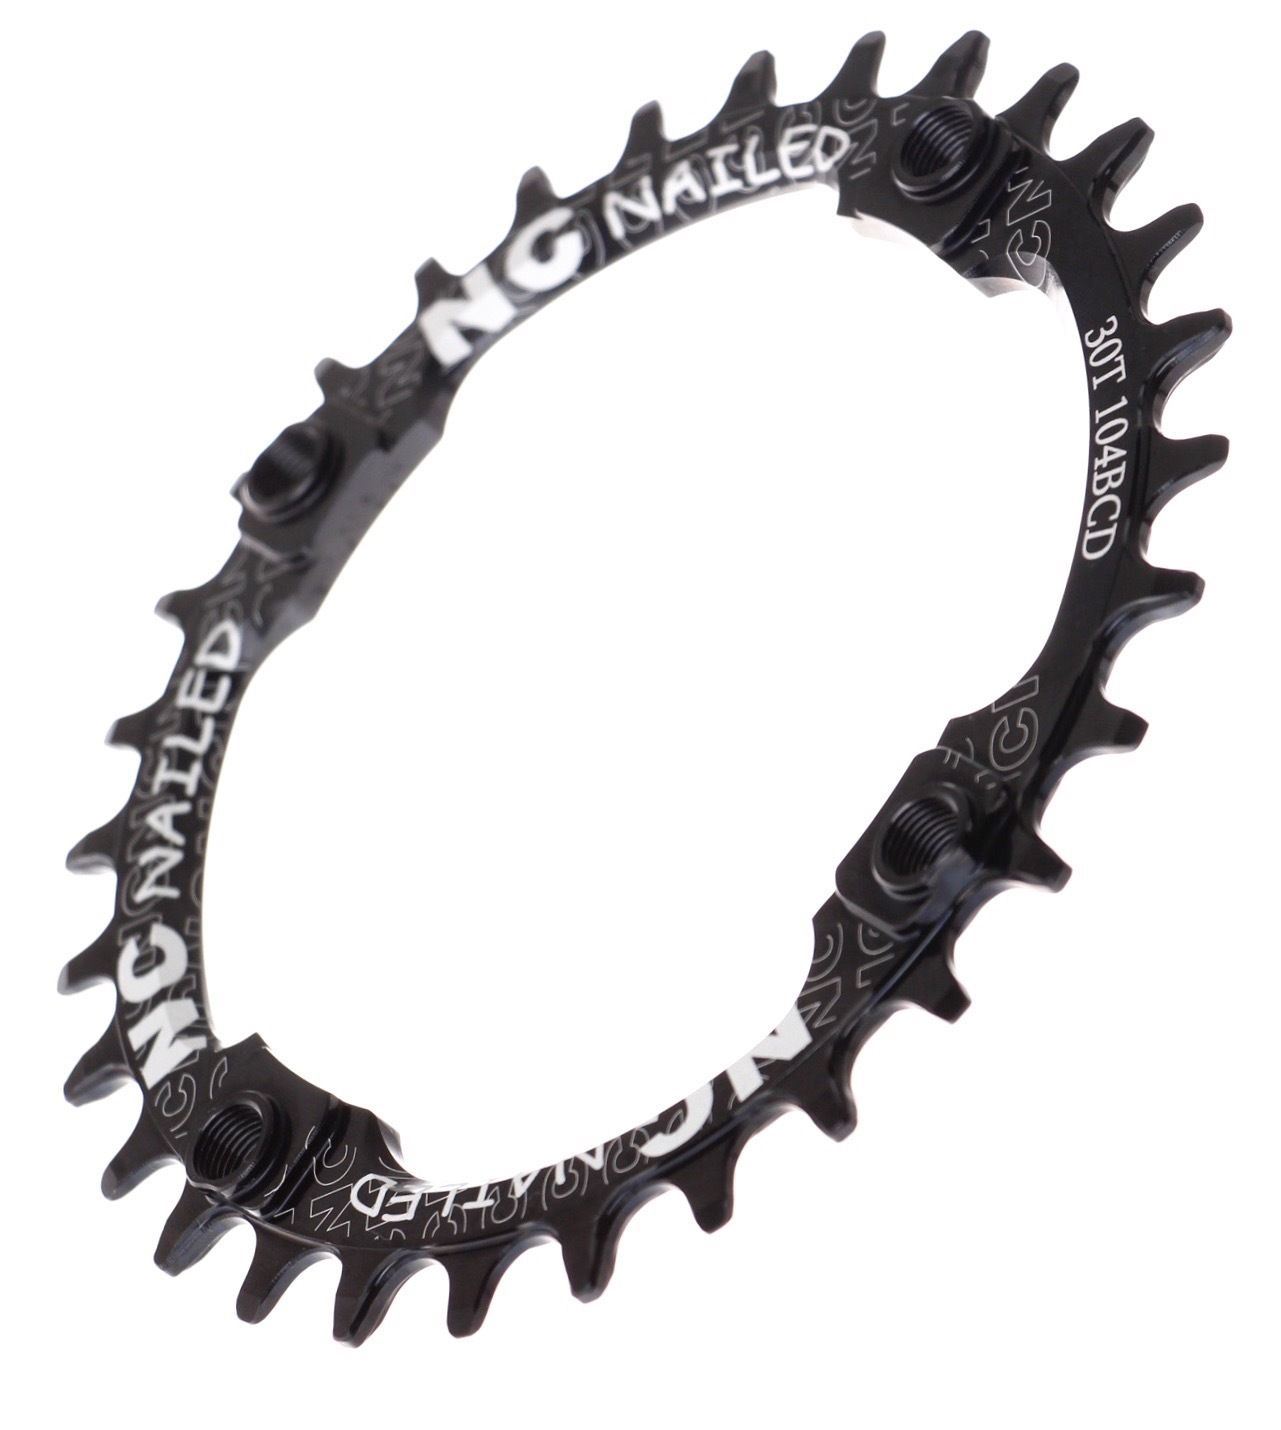 Narrow Wide Bike Chain Chainring 104mm x 30T 1x 9 10 11 Speed fit Race Face